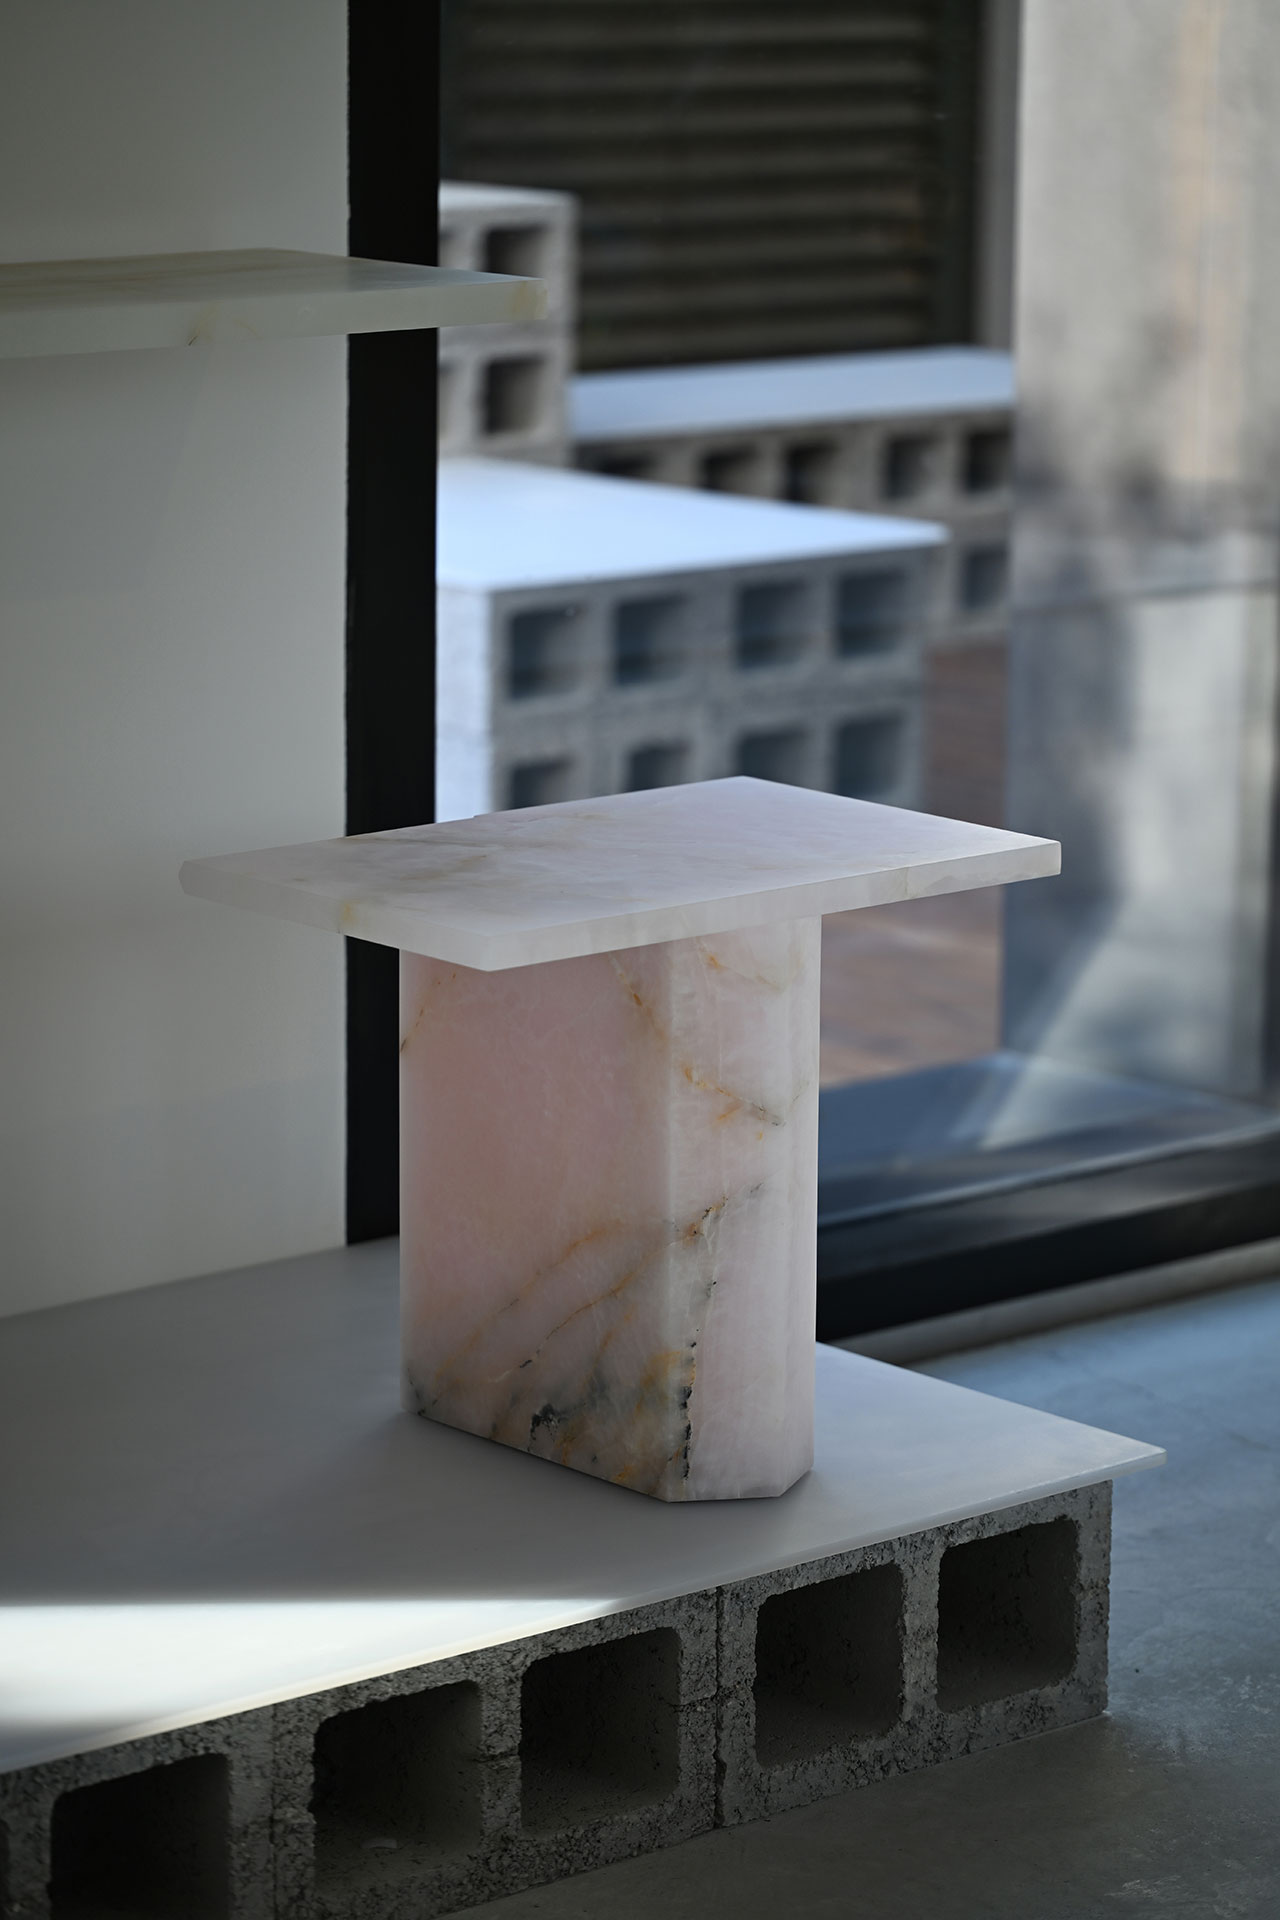 Exhibition view. Urban Fabric Series 001 at Gallery Collectional, Dubai. © Mario Tsai Studio.
Featured:
Crystal III (side table), 2024, by Kensaku Oshiro. Pink Onyx, 450 x 550 x 350 mm. Unique, limited series.